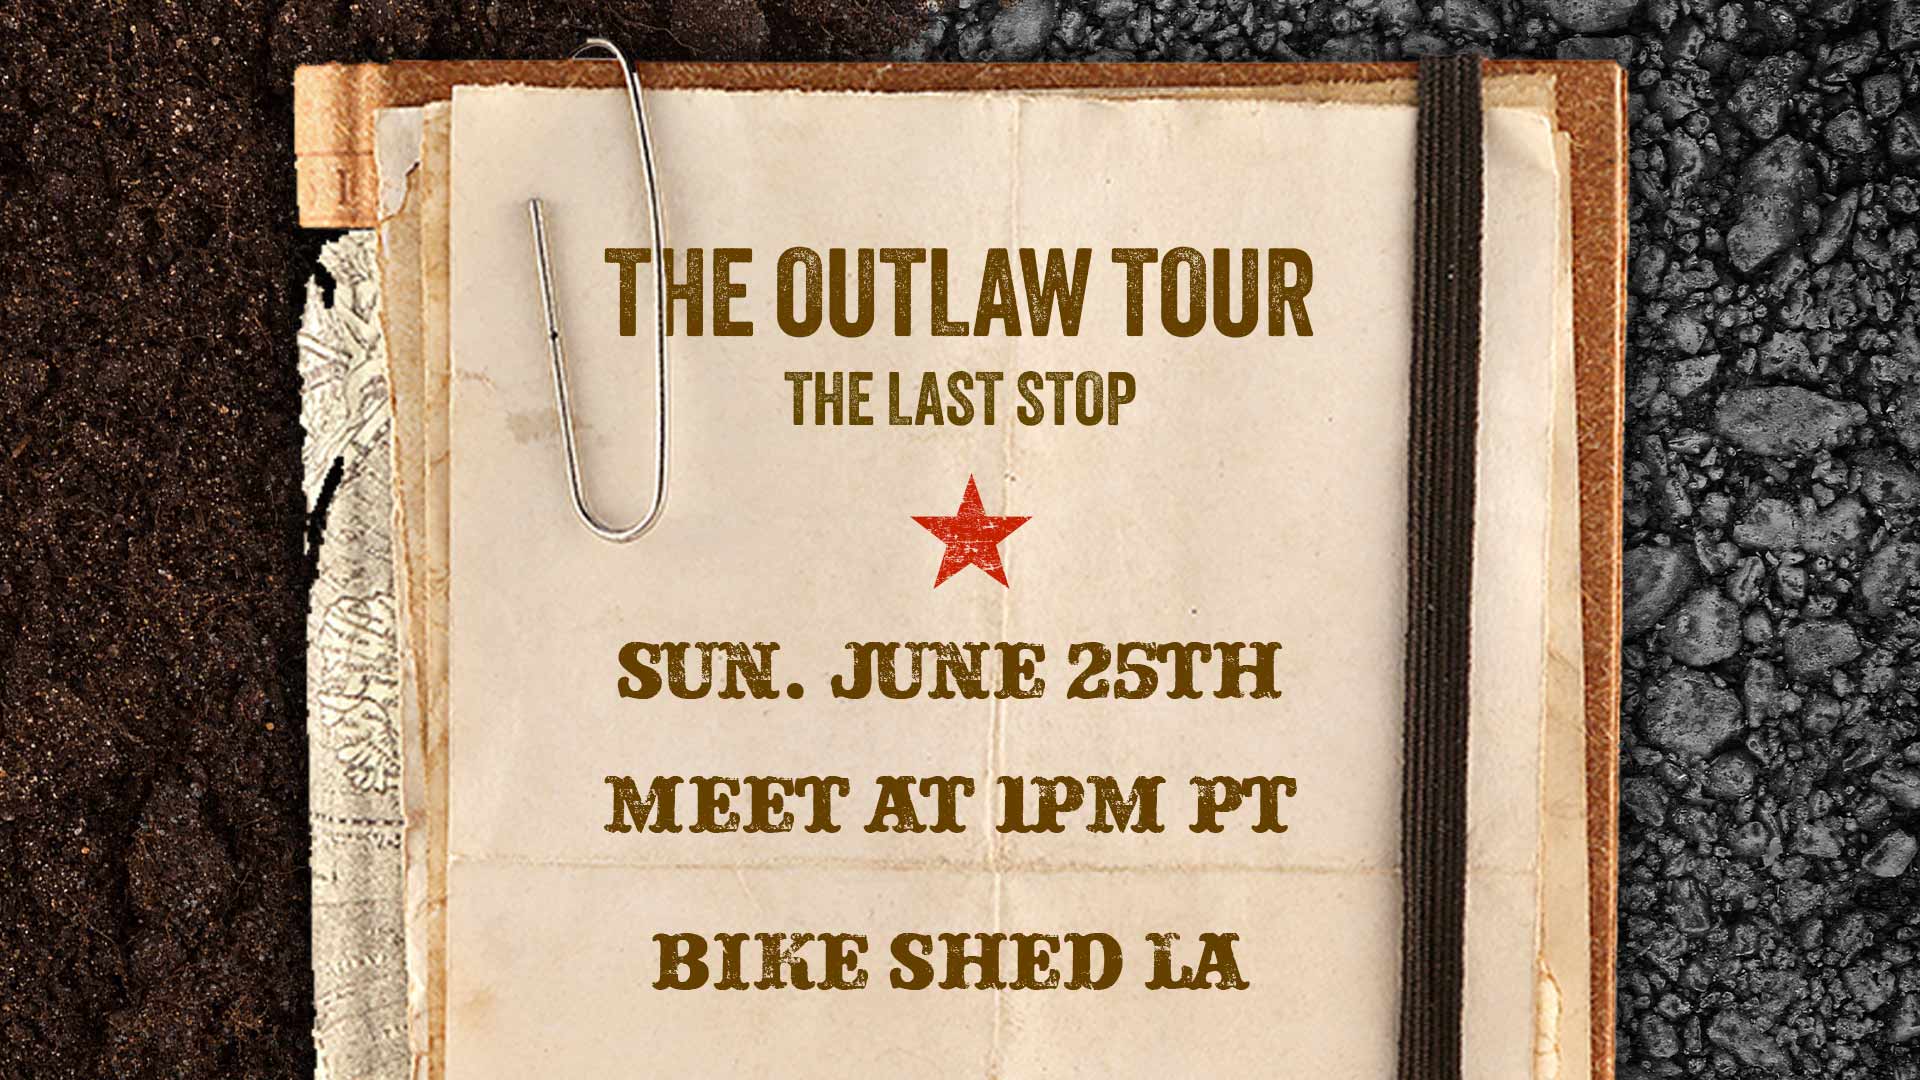 JUNE 25 The Outlaw Tour